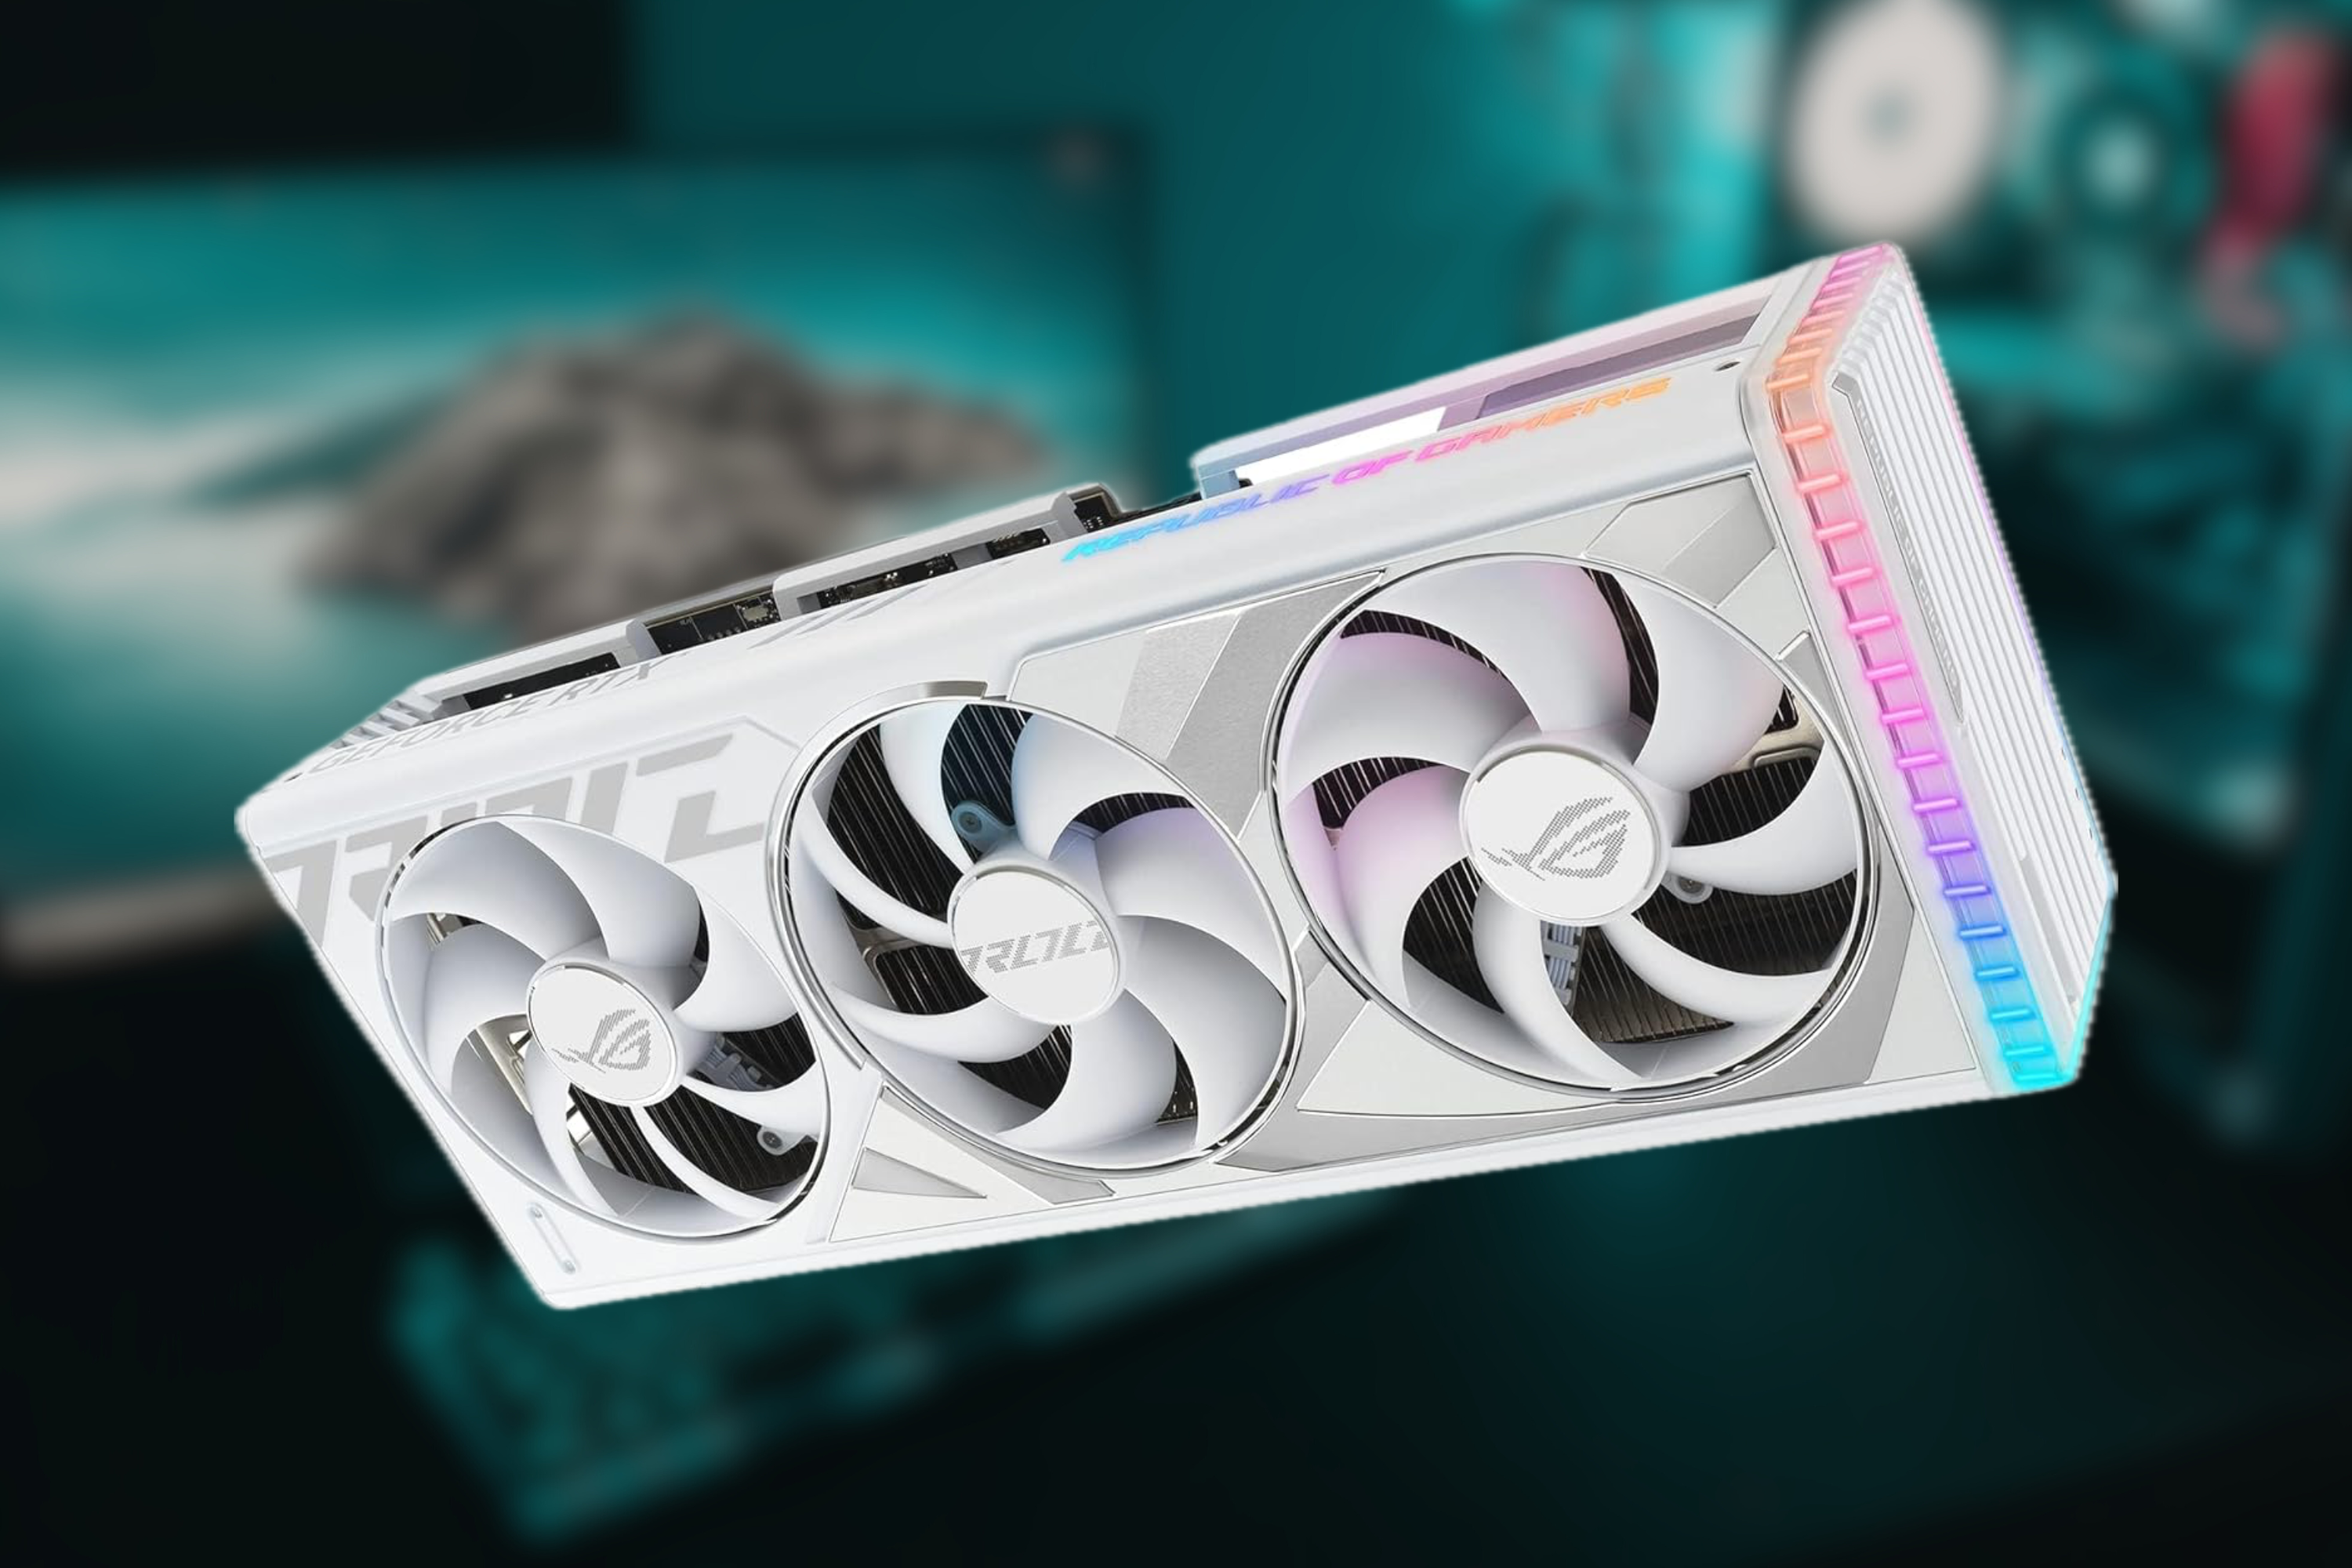 ASUS ROG Strix GeForce RTX 4090 White OC Edition Gaming Graphics Card on blurred background